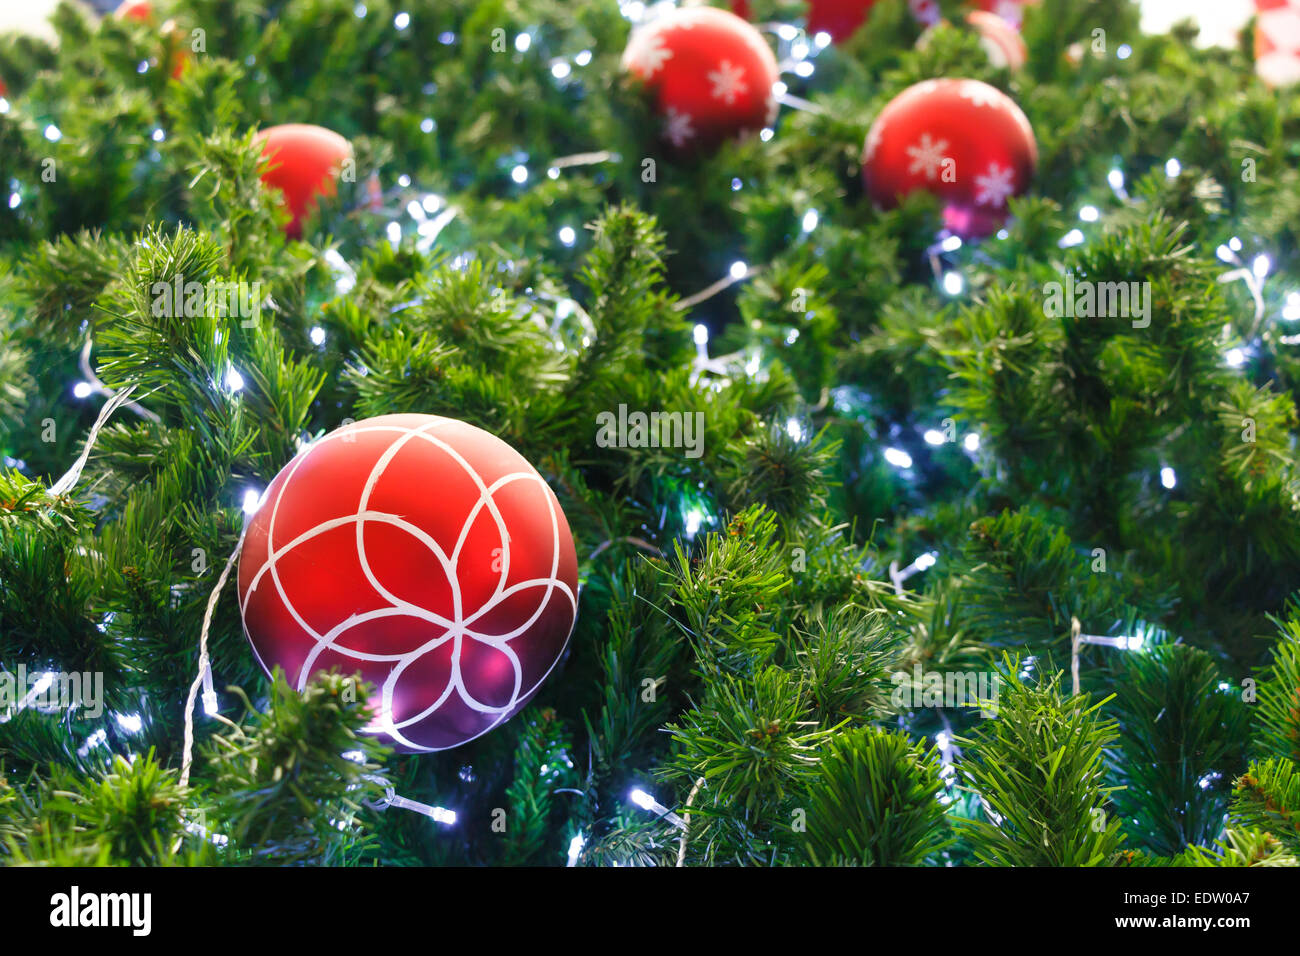 red ball and light bulb were decorated on pine tree on Christmas  day in Thailand Stock Photo